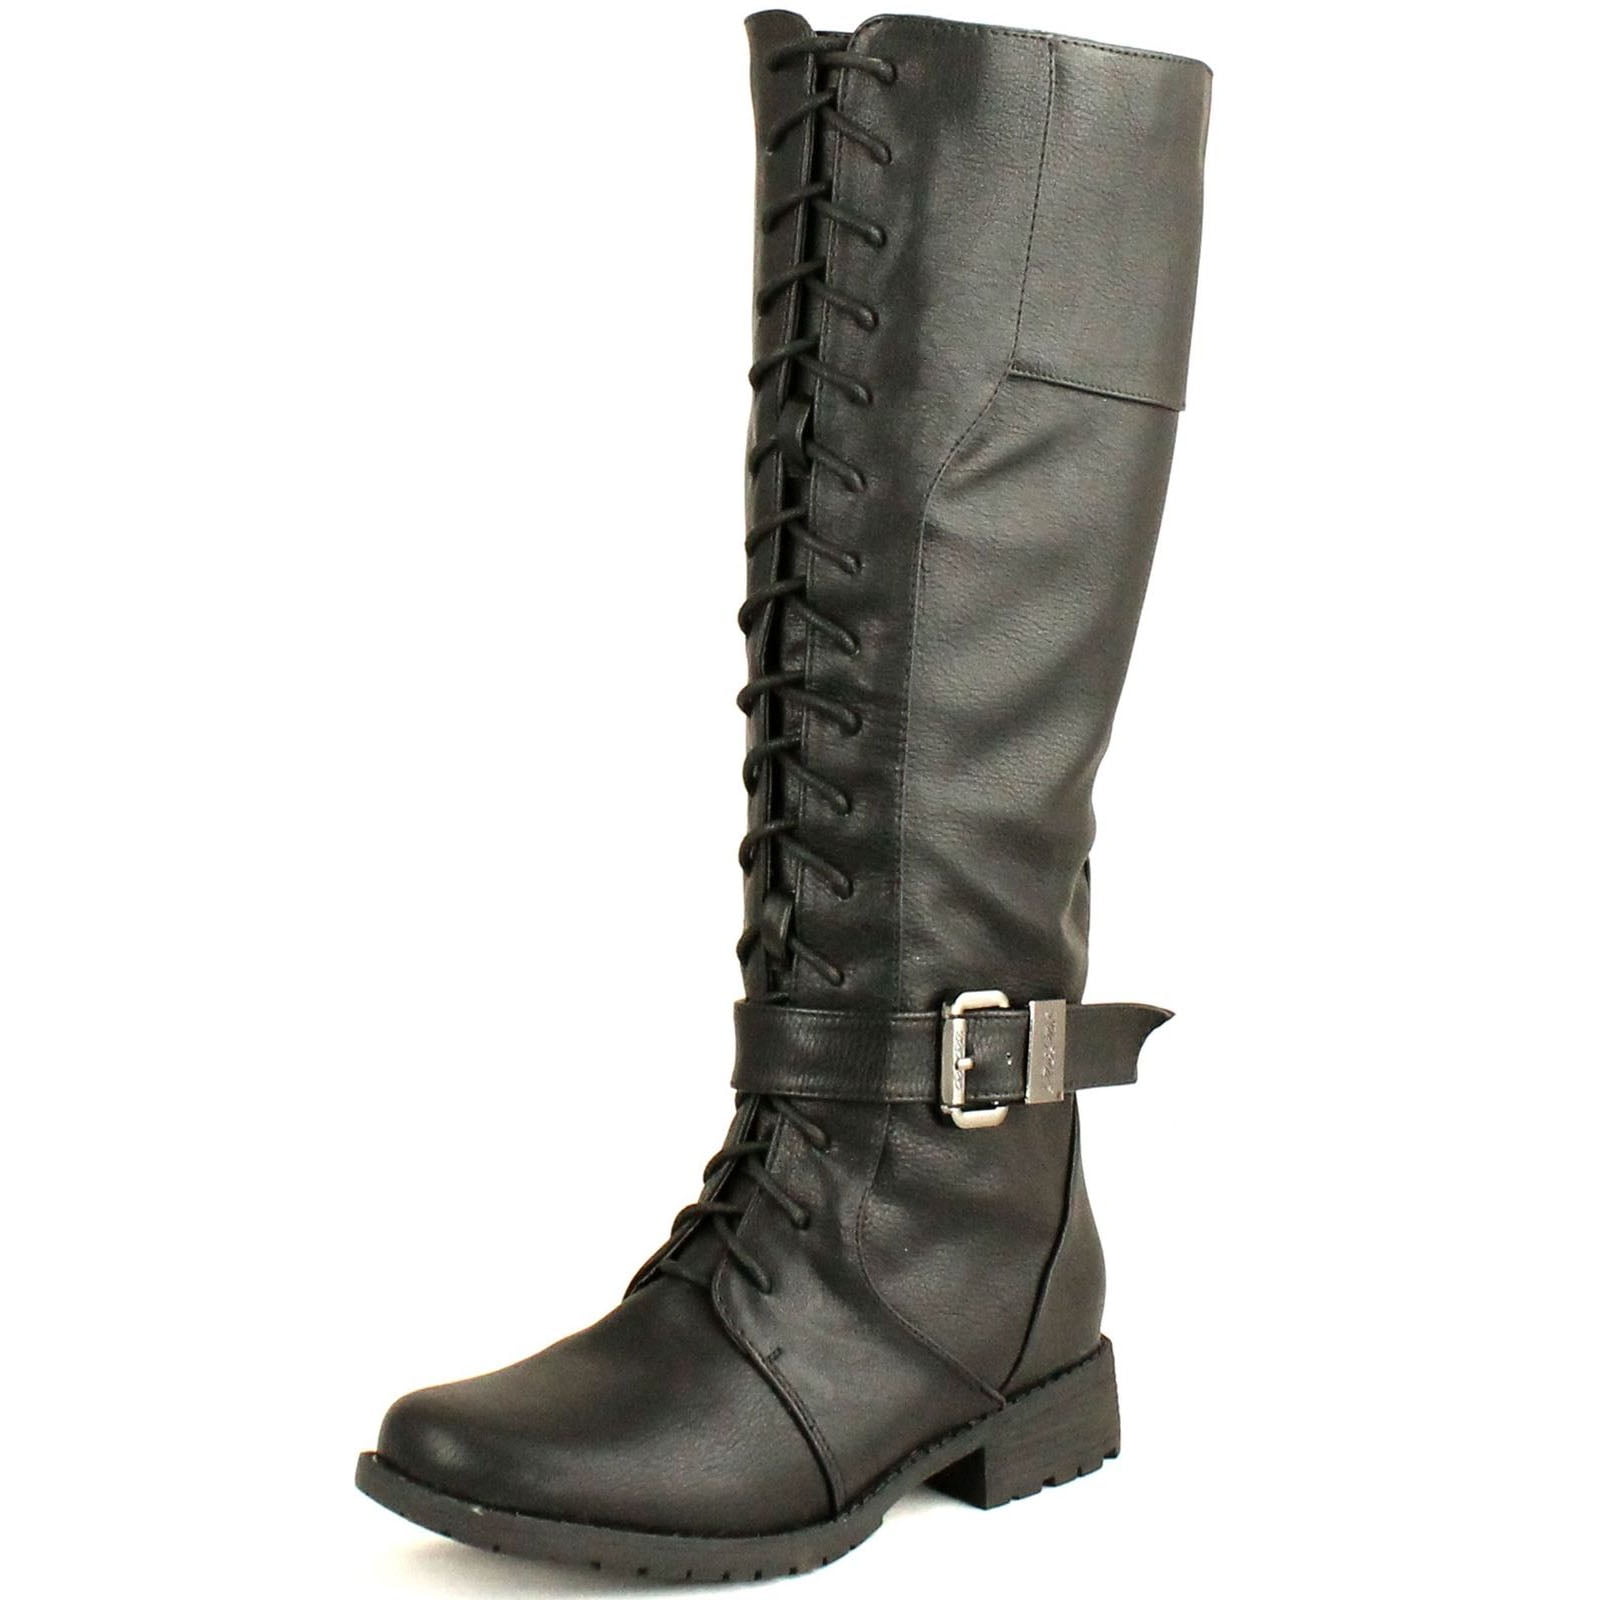 DBDK Womens Calcia-6 Round Toe Knee High Combat Riding Boots with Side Zipper